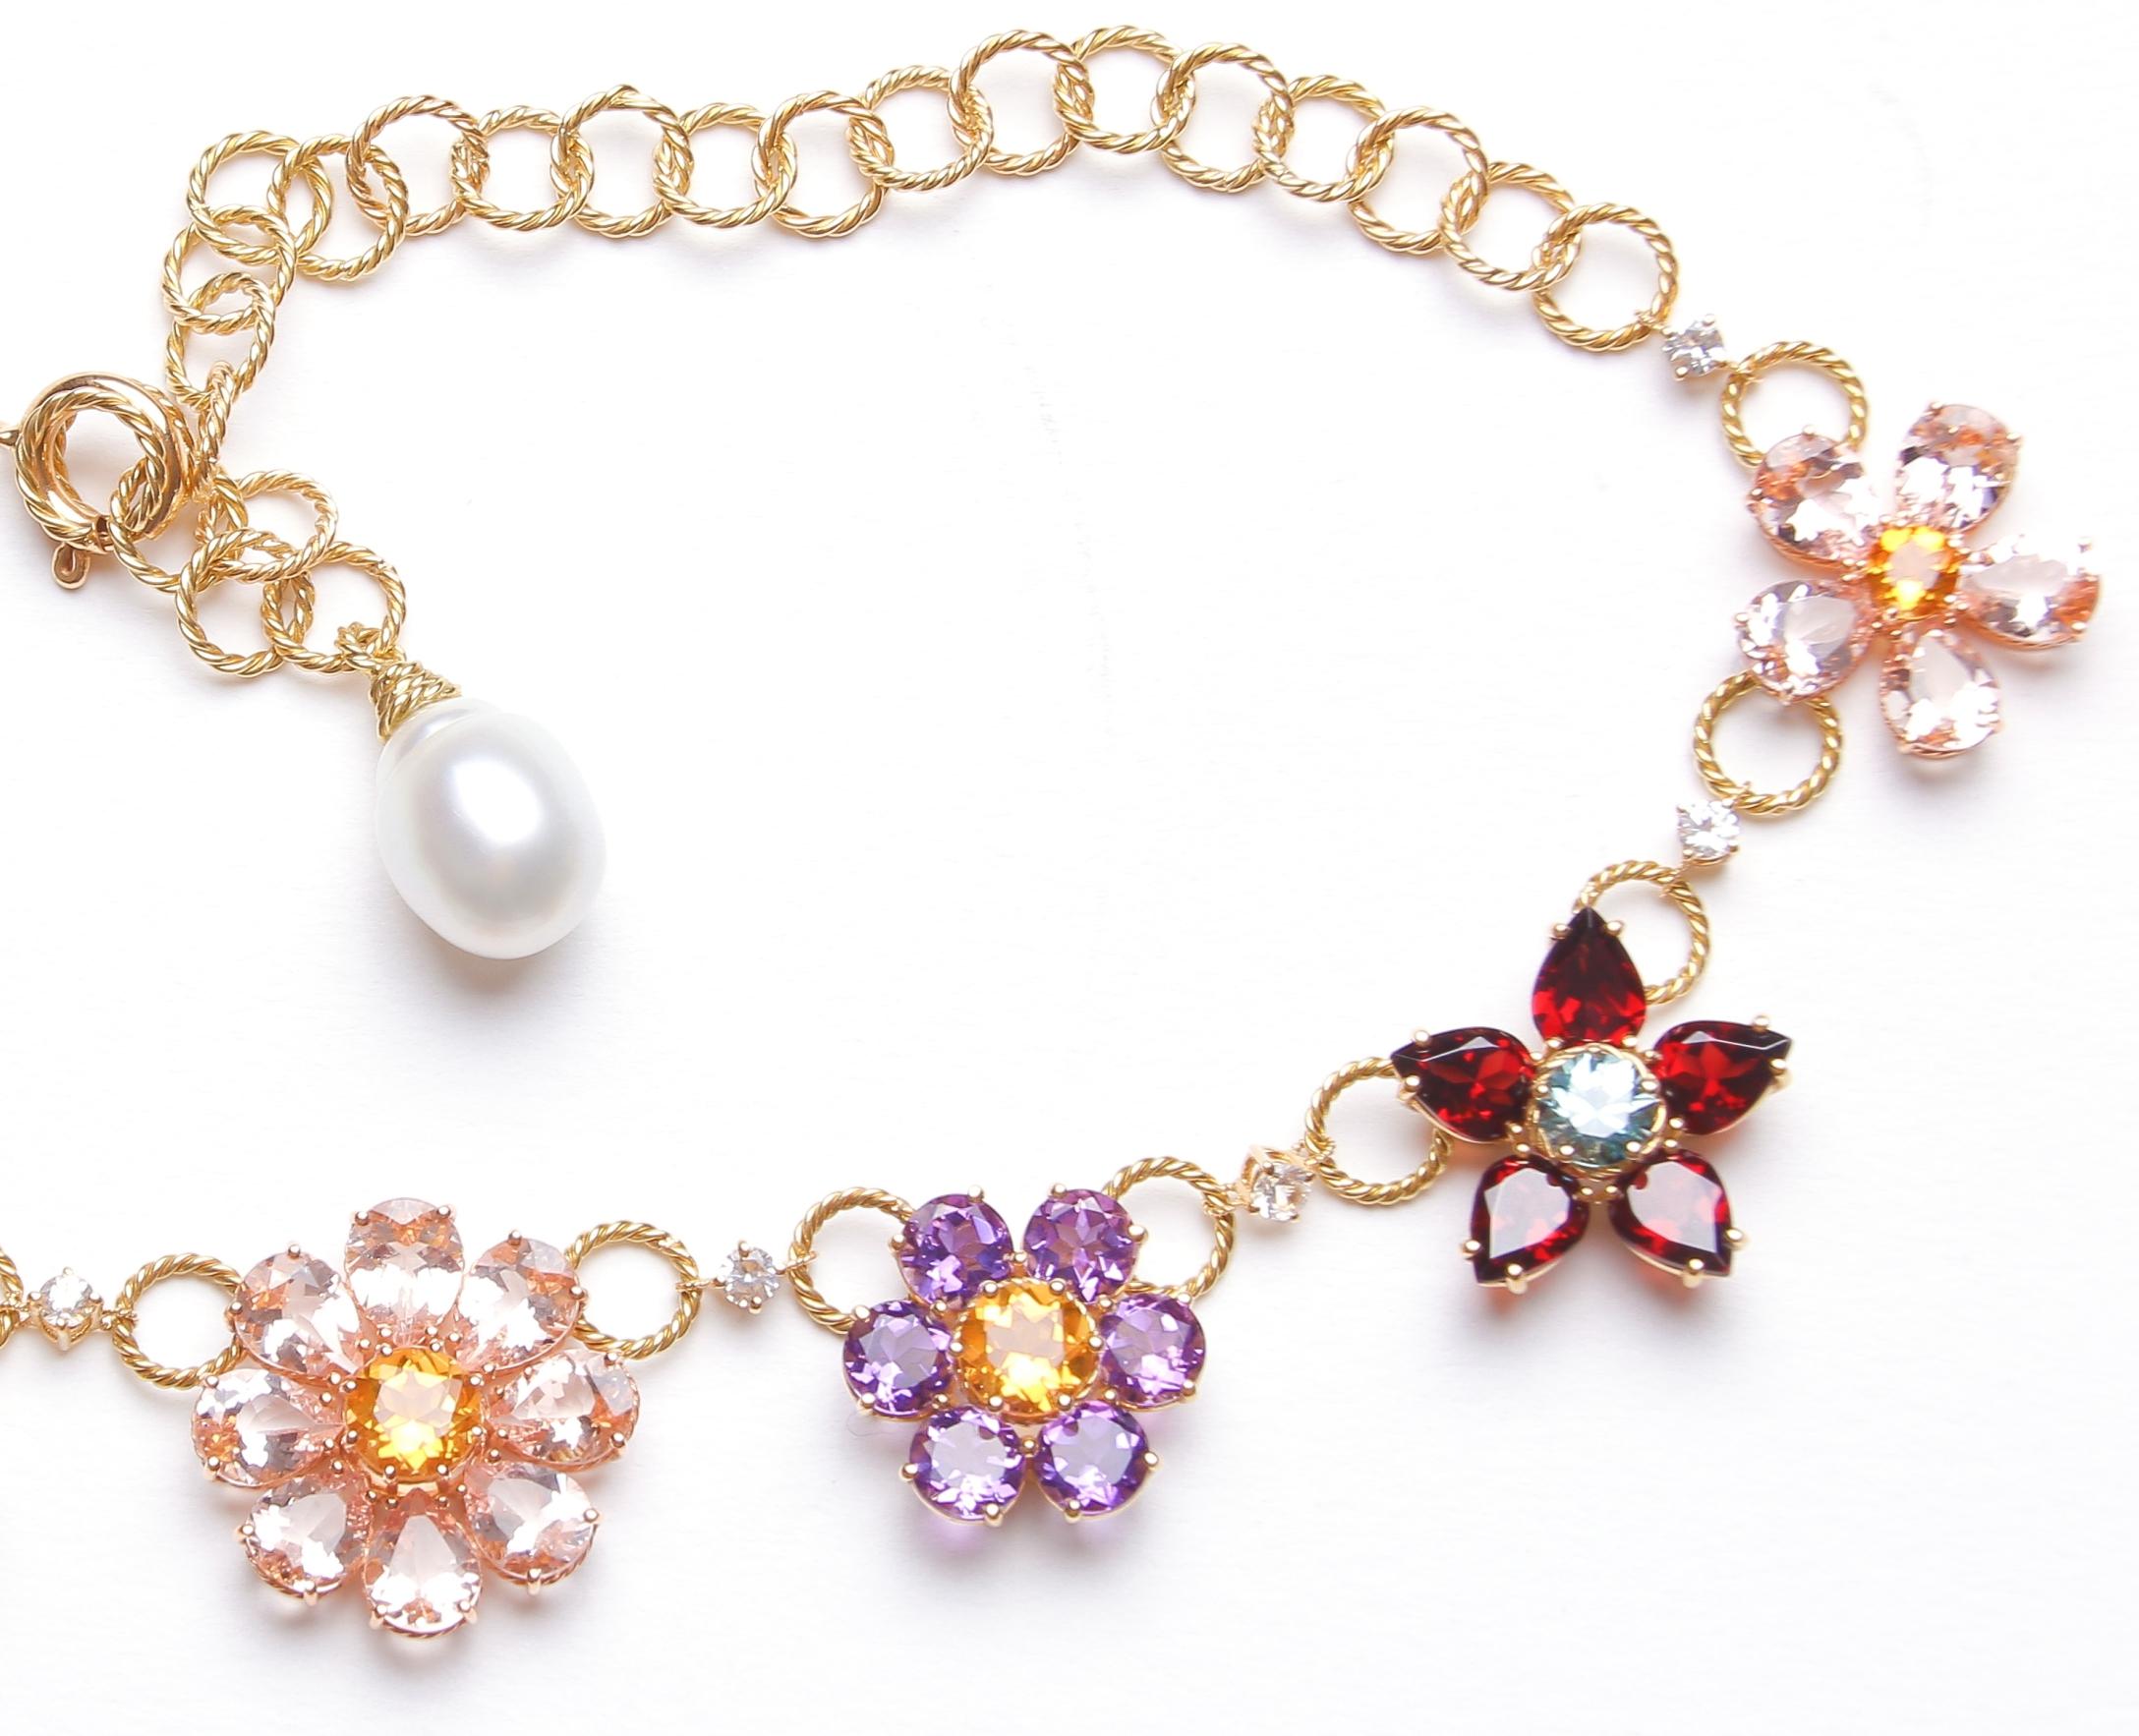 dolce and gabana necklace